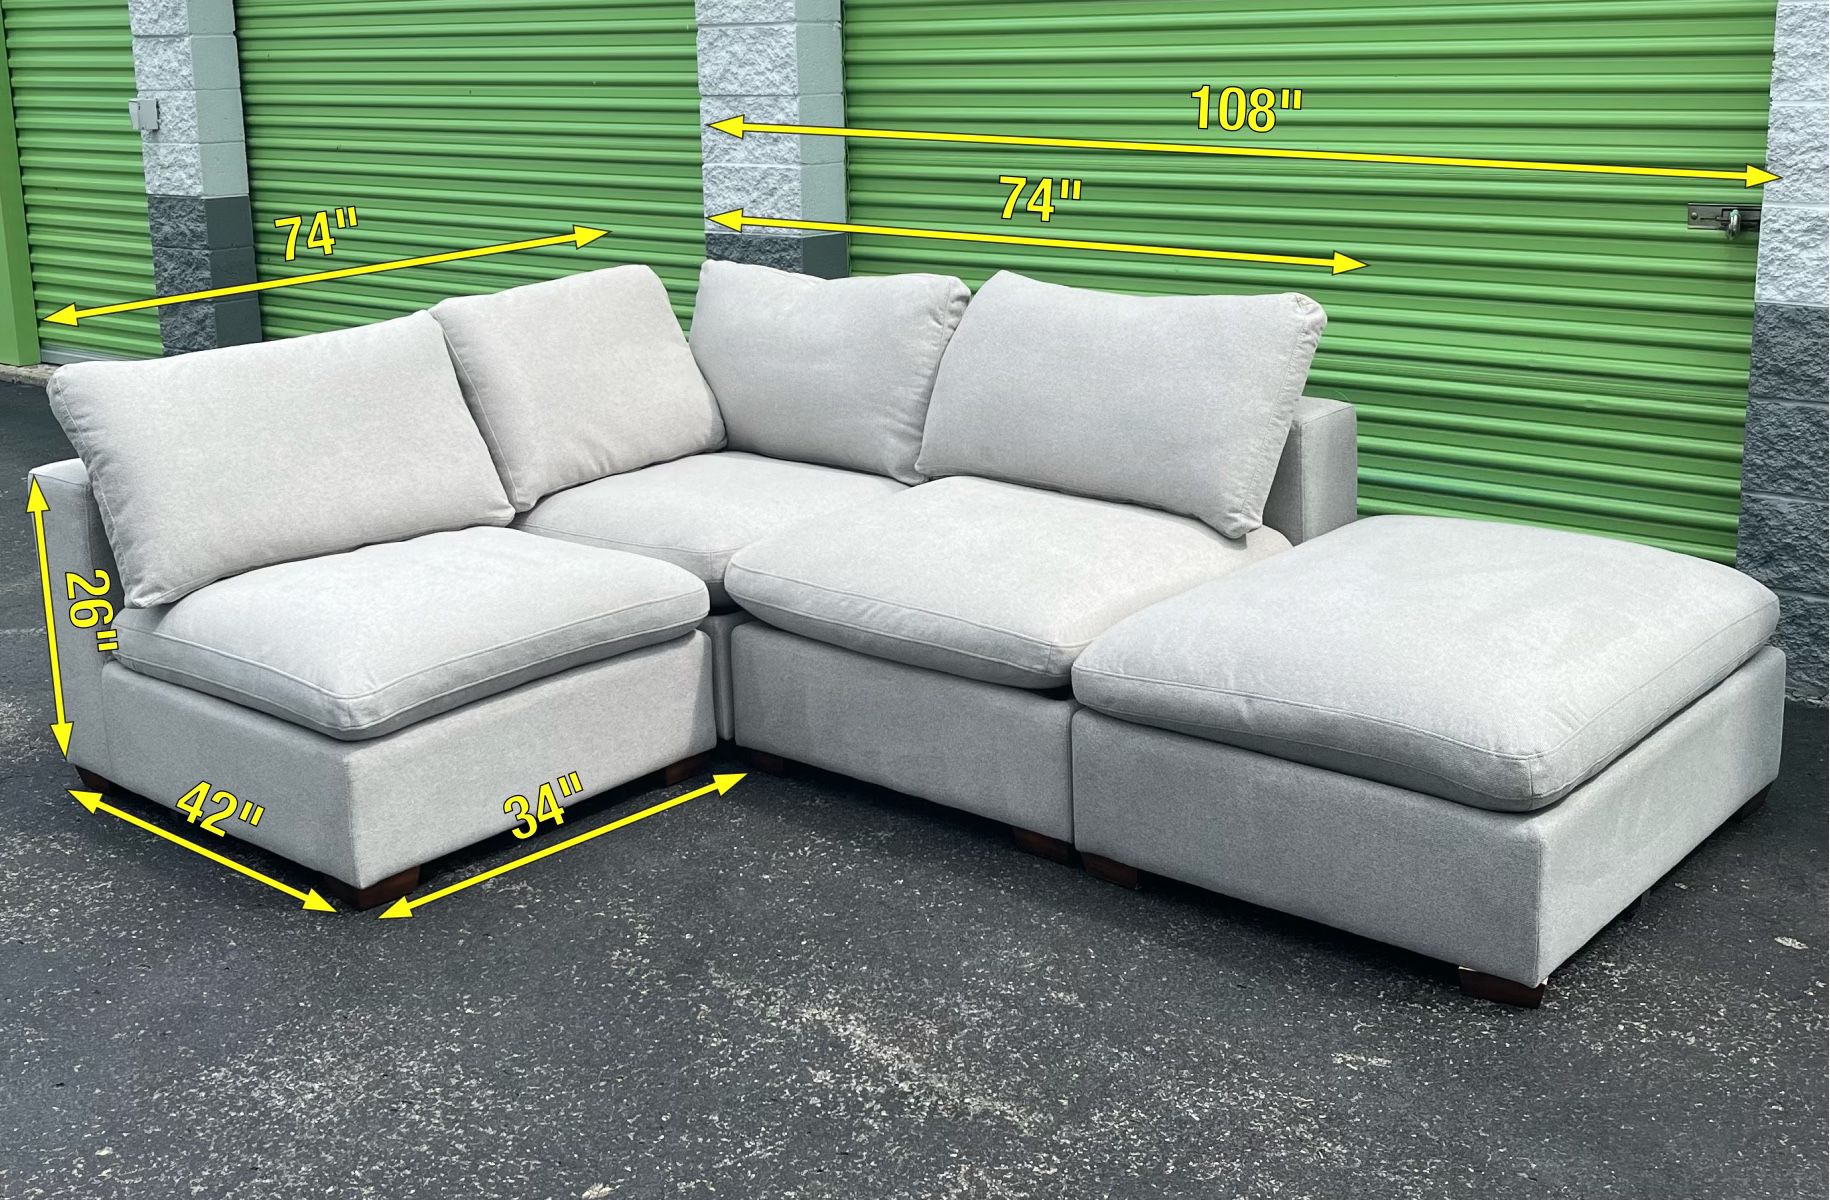 Thomasville Modular Sectional - Over-Sized Couch - 4 Pieces - Free Delivery